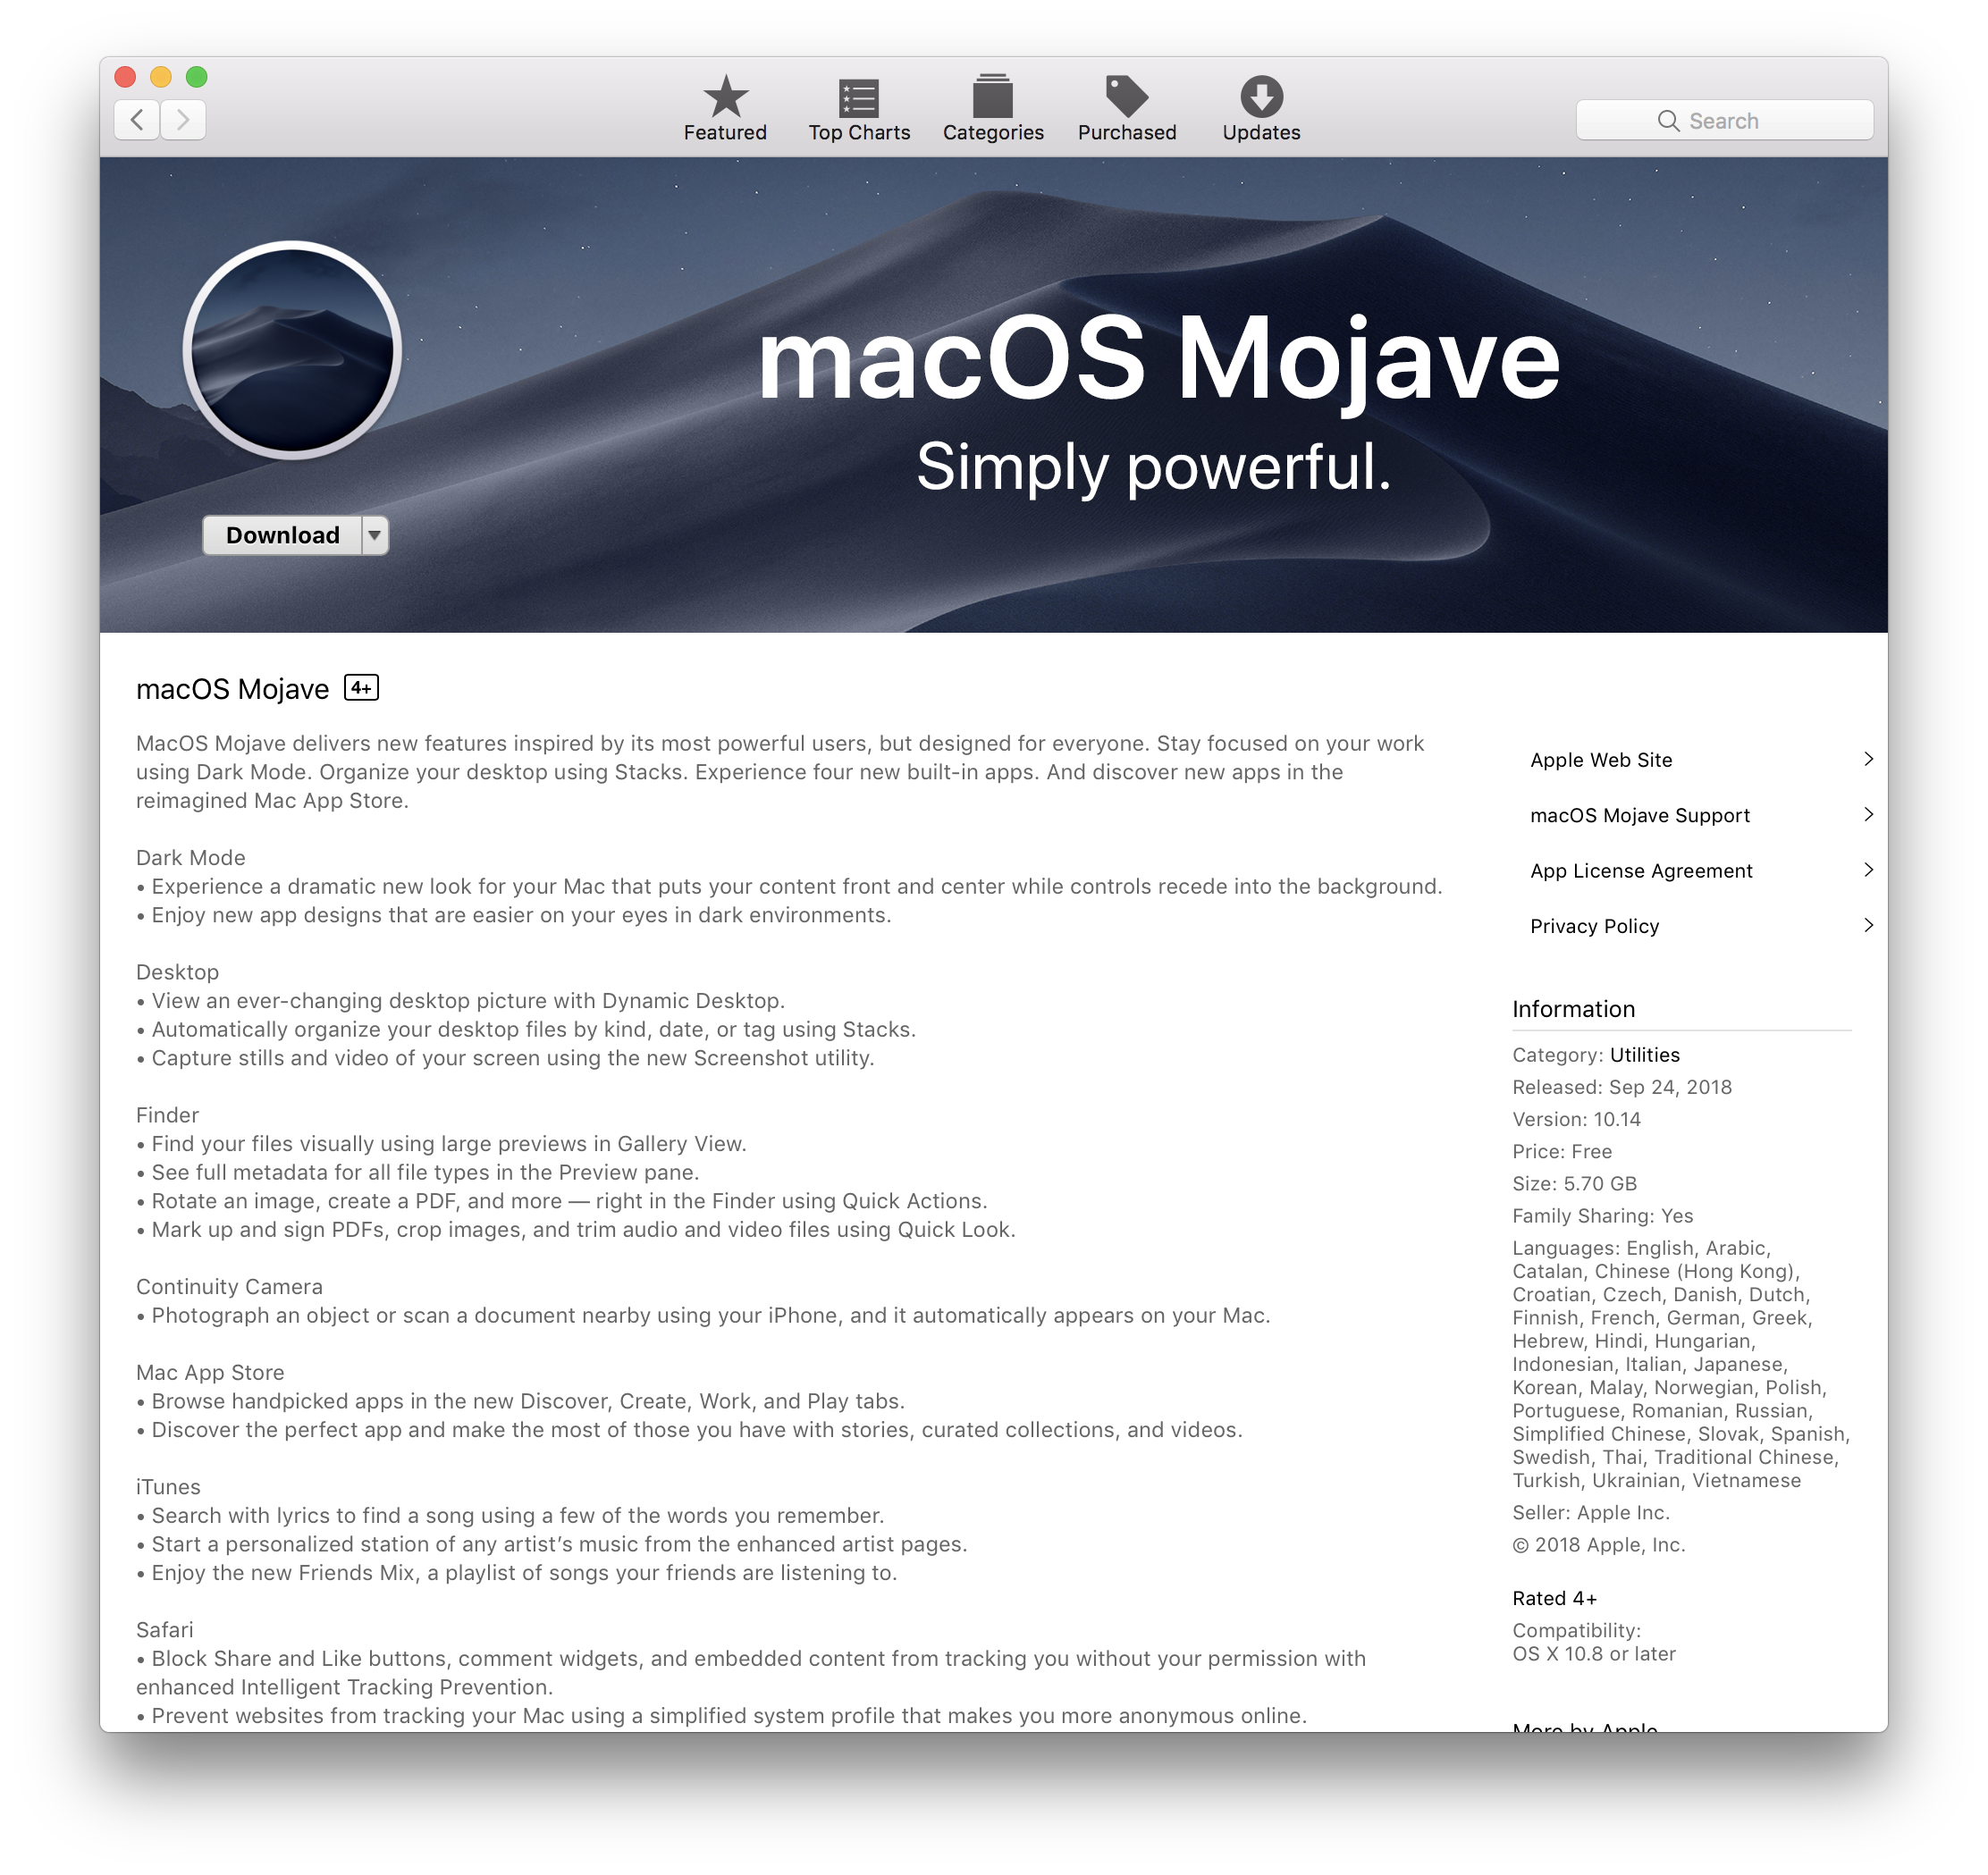 vip access app for macos mojave